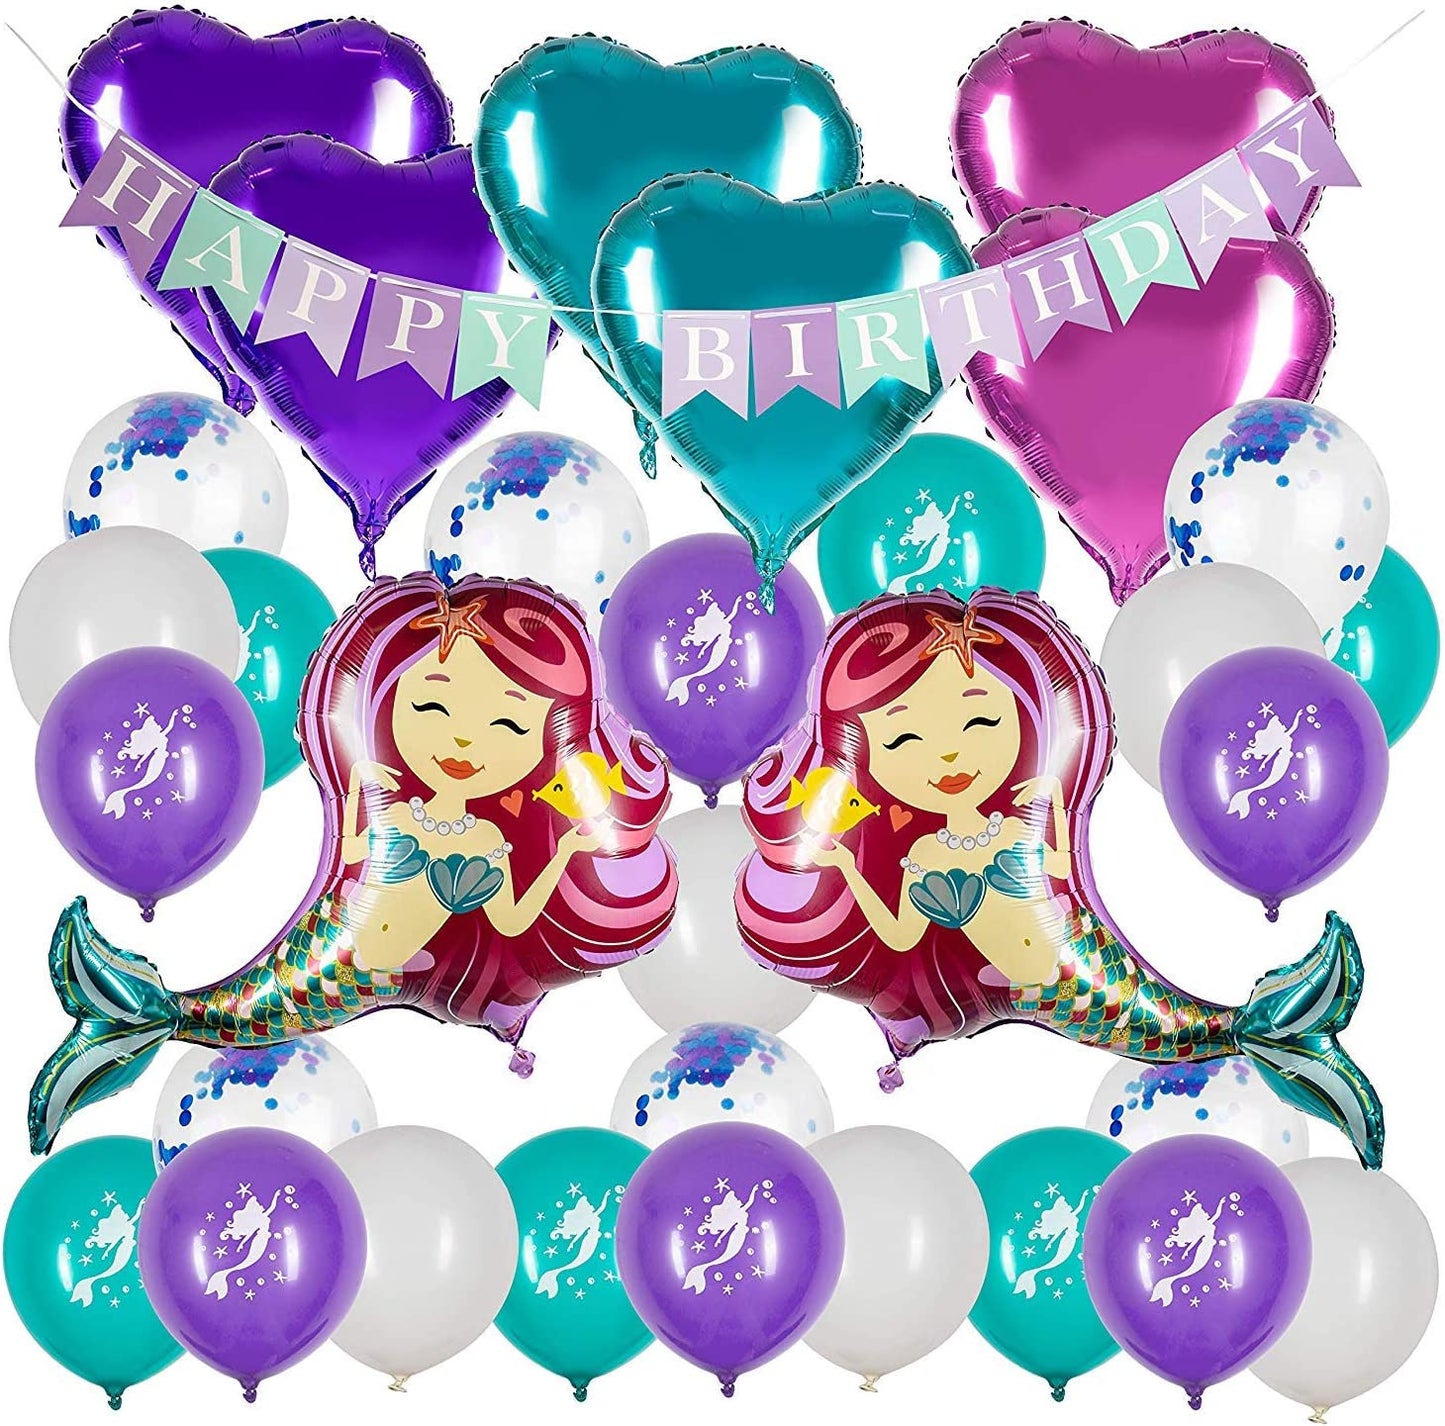 Pack of 2 Mermaid Mylar Foil Balloons - Large 38-inch Balloons - Birthday Mermaid-themed Backdrop Party Decorations